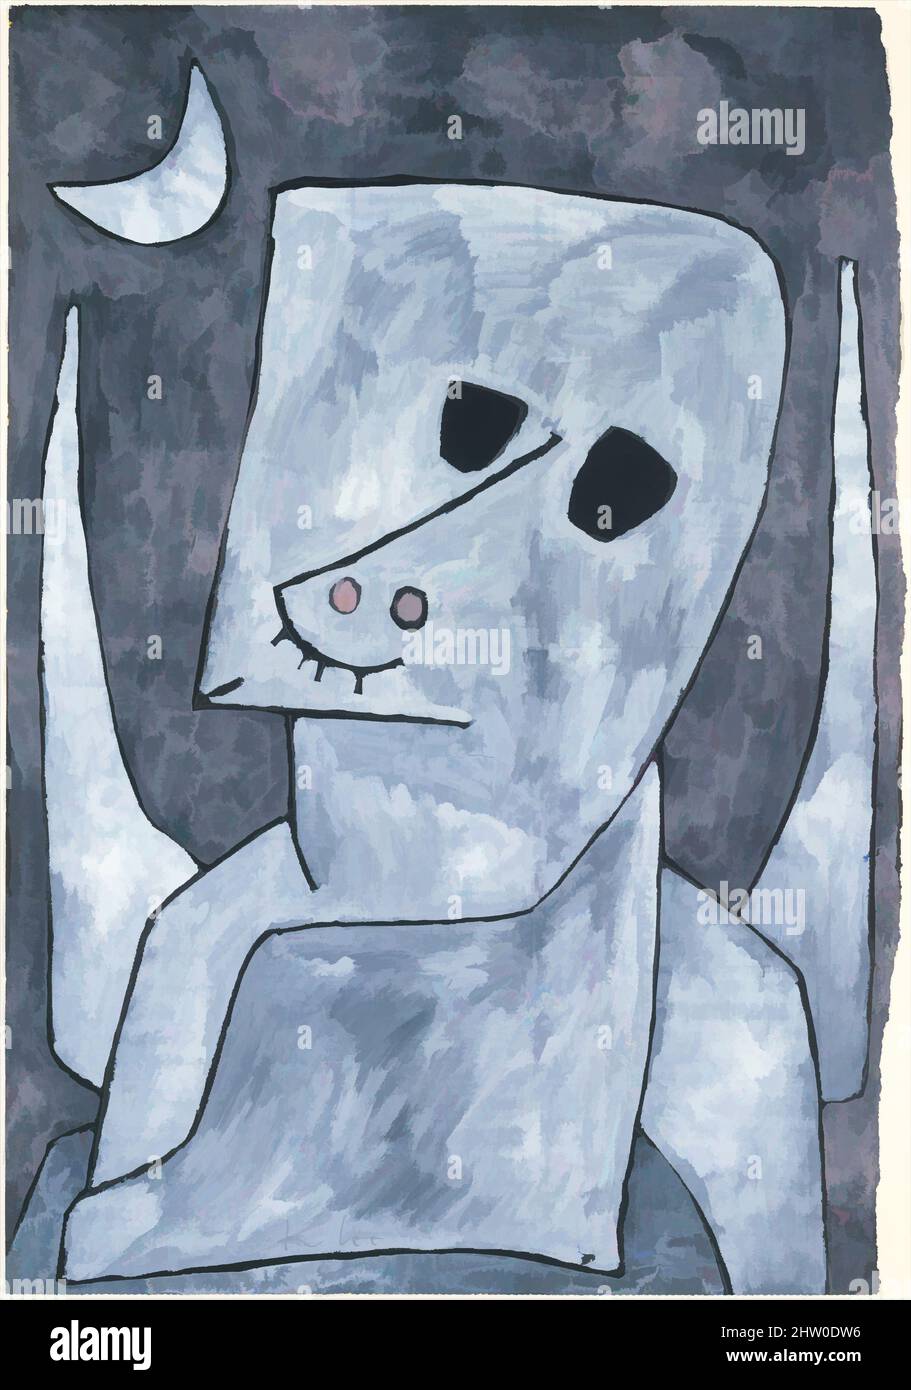 Art inspired by Angel Applicant, 1939, Gouache, ink, and graphite on paper mounted on cardboard, 25 3/4 × 17 1/2 in. (65.4 × 44.5 cm), Drawings, Paul Klee (German (born Switzerland), Münchenbuchsee 1879–1940 Muralto-Locarno), It seems doubtful that this Angel Applicant, resembling the, Classic works modernized by Artotop with a splash of modernity. Shapes, color and value, eye-catching visual impact on art. Emotions through freedom of artworks in a contemporary way. A timeless message pursuing a wildly creative new direction. Artists turning to the digital medium and creating the Artotop NFT Stock Photo